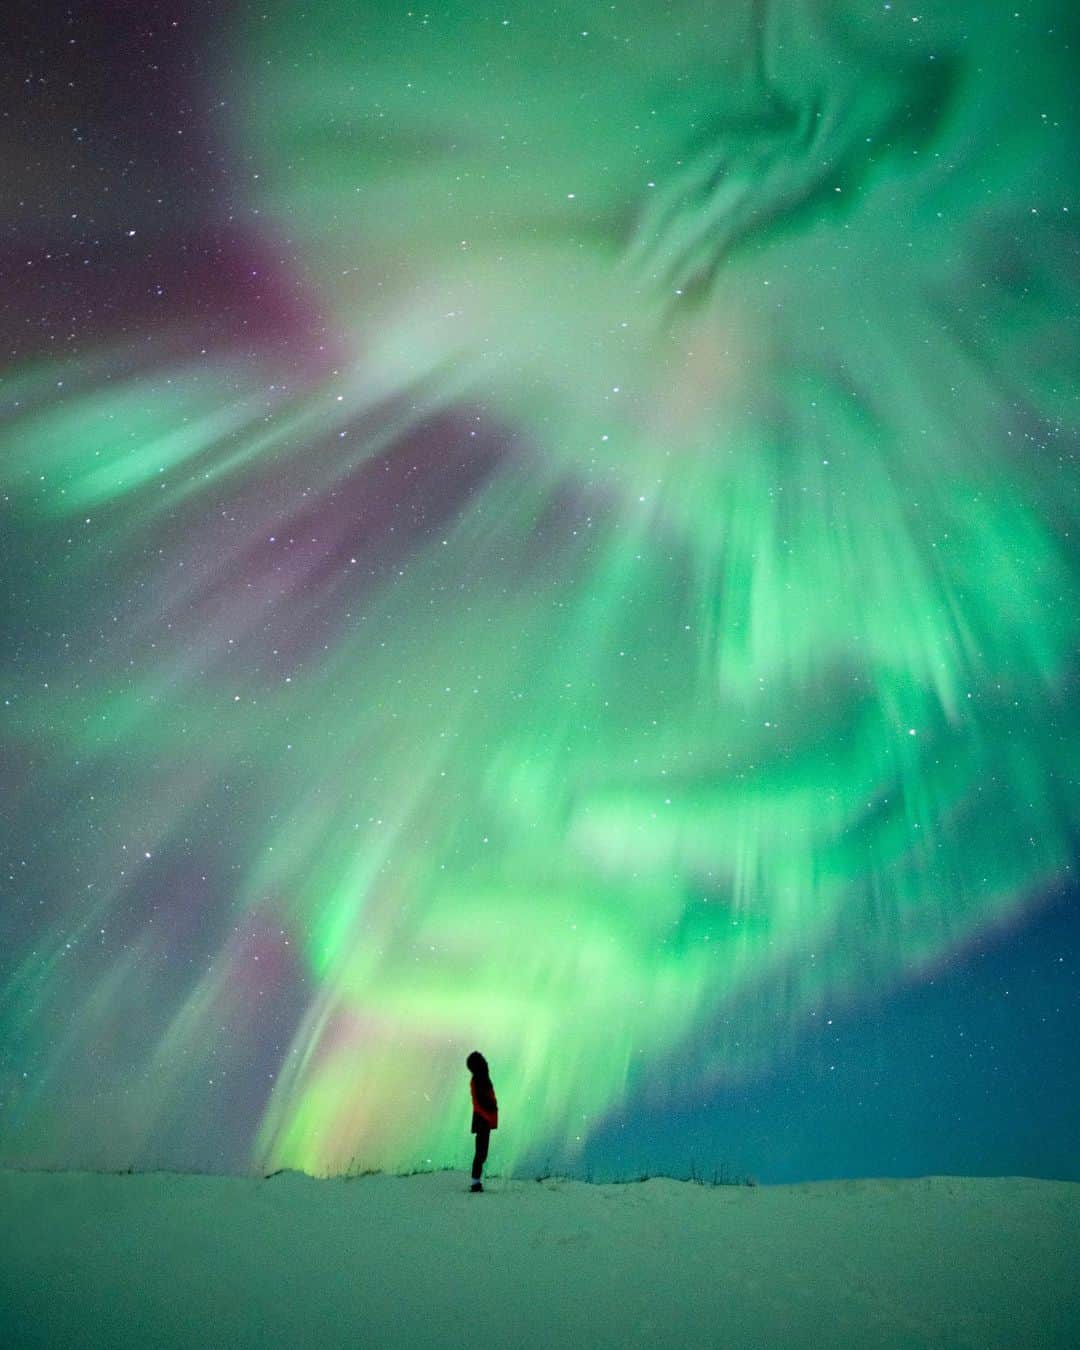 Travis Burkeのインスタグラム：「Last night I was mind blown by my first proper northern lights show. I am constantly fascinated and humbled by earth and space, and watching energy from storms on the sun collide with earth's upper atmosphere above the Iceland sky is something I’ll never forget. My friend @leia_vita and I ended up staying out until almost 5 am in freezing temperatures, but I knew I wouldn't have been able to sleep knowing I might miss a show of a lifetime. About to head out for round two right now!」